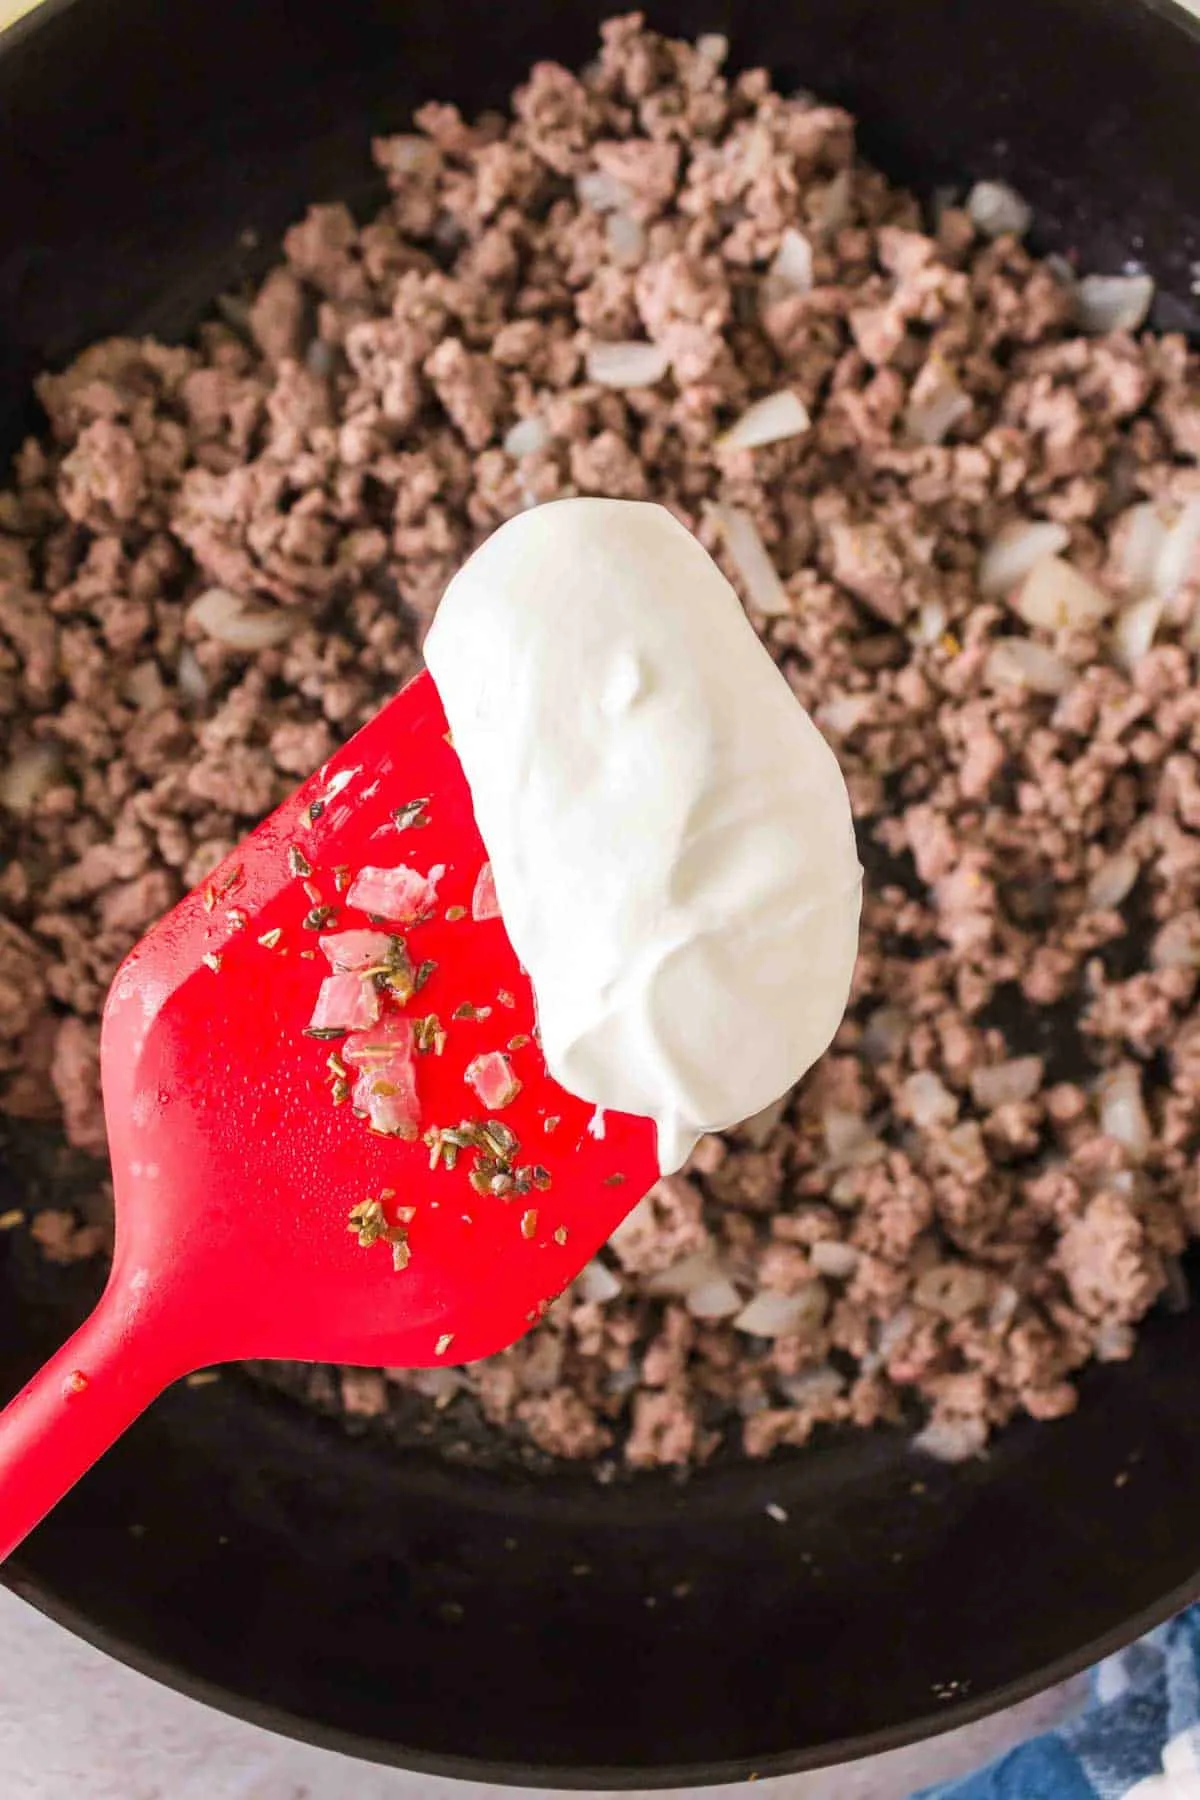 sour cream being added to skillet with ground beef